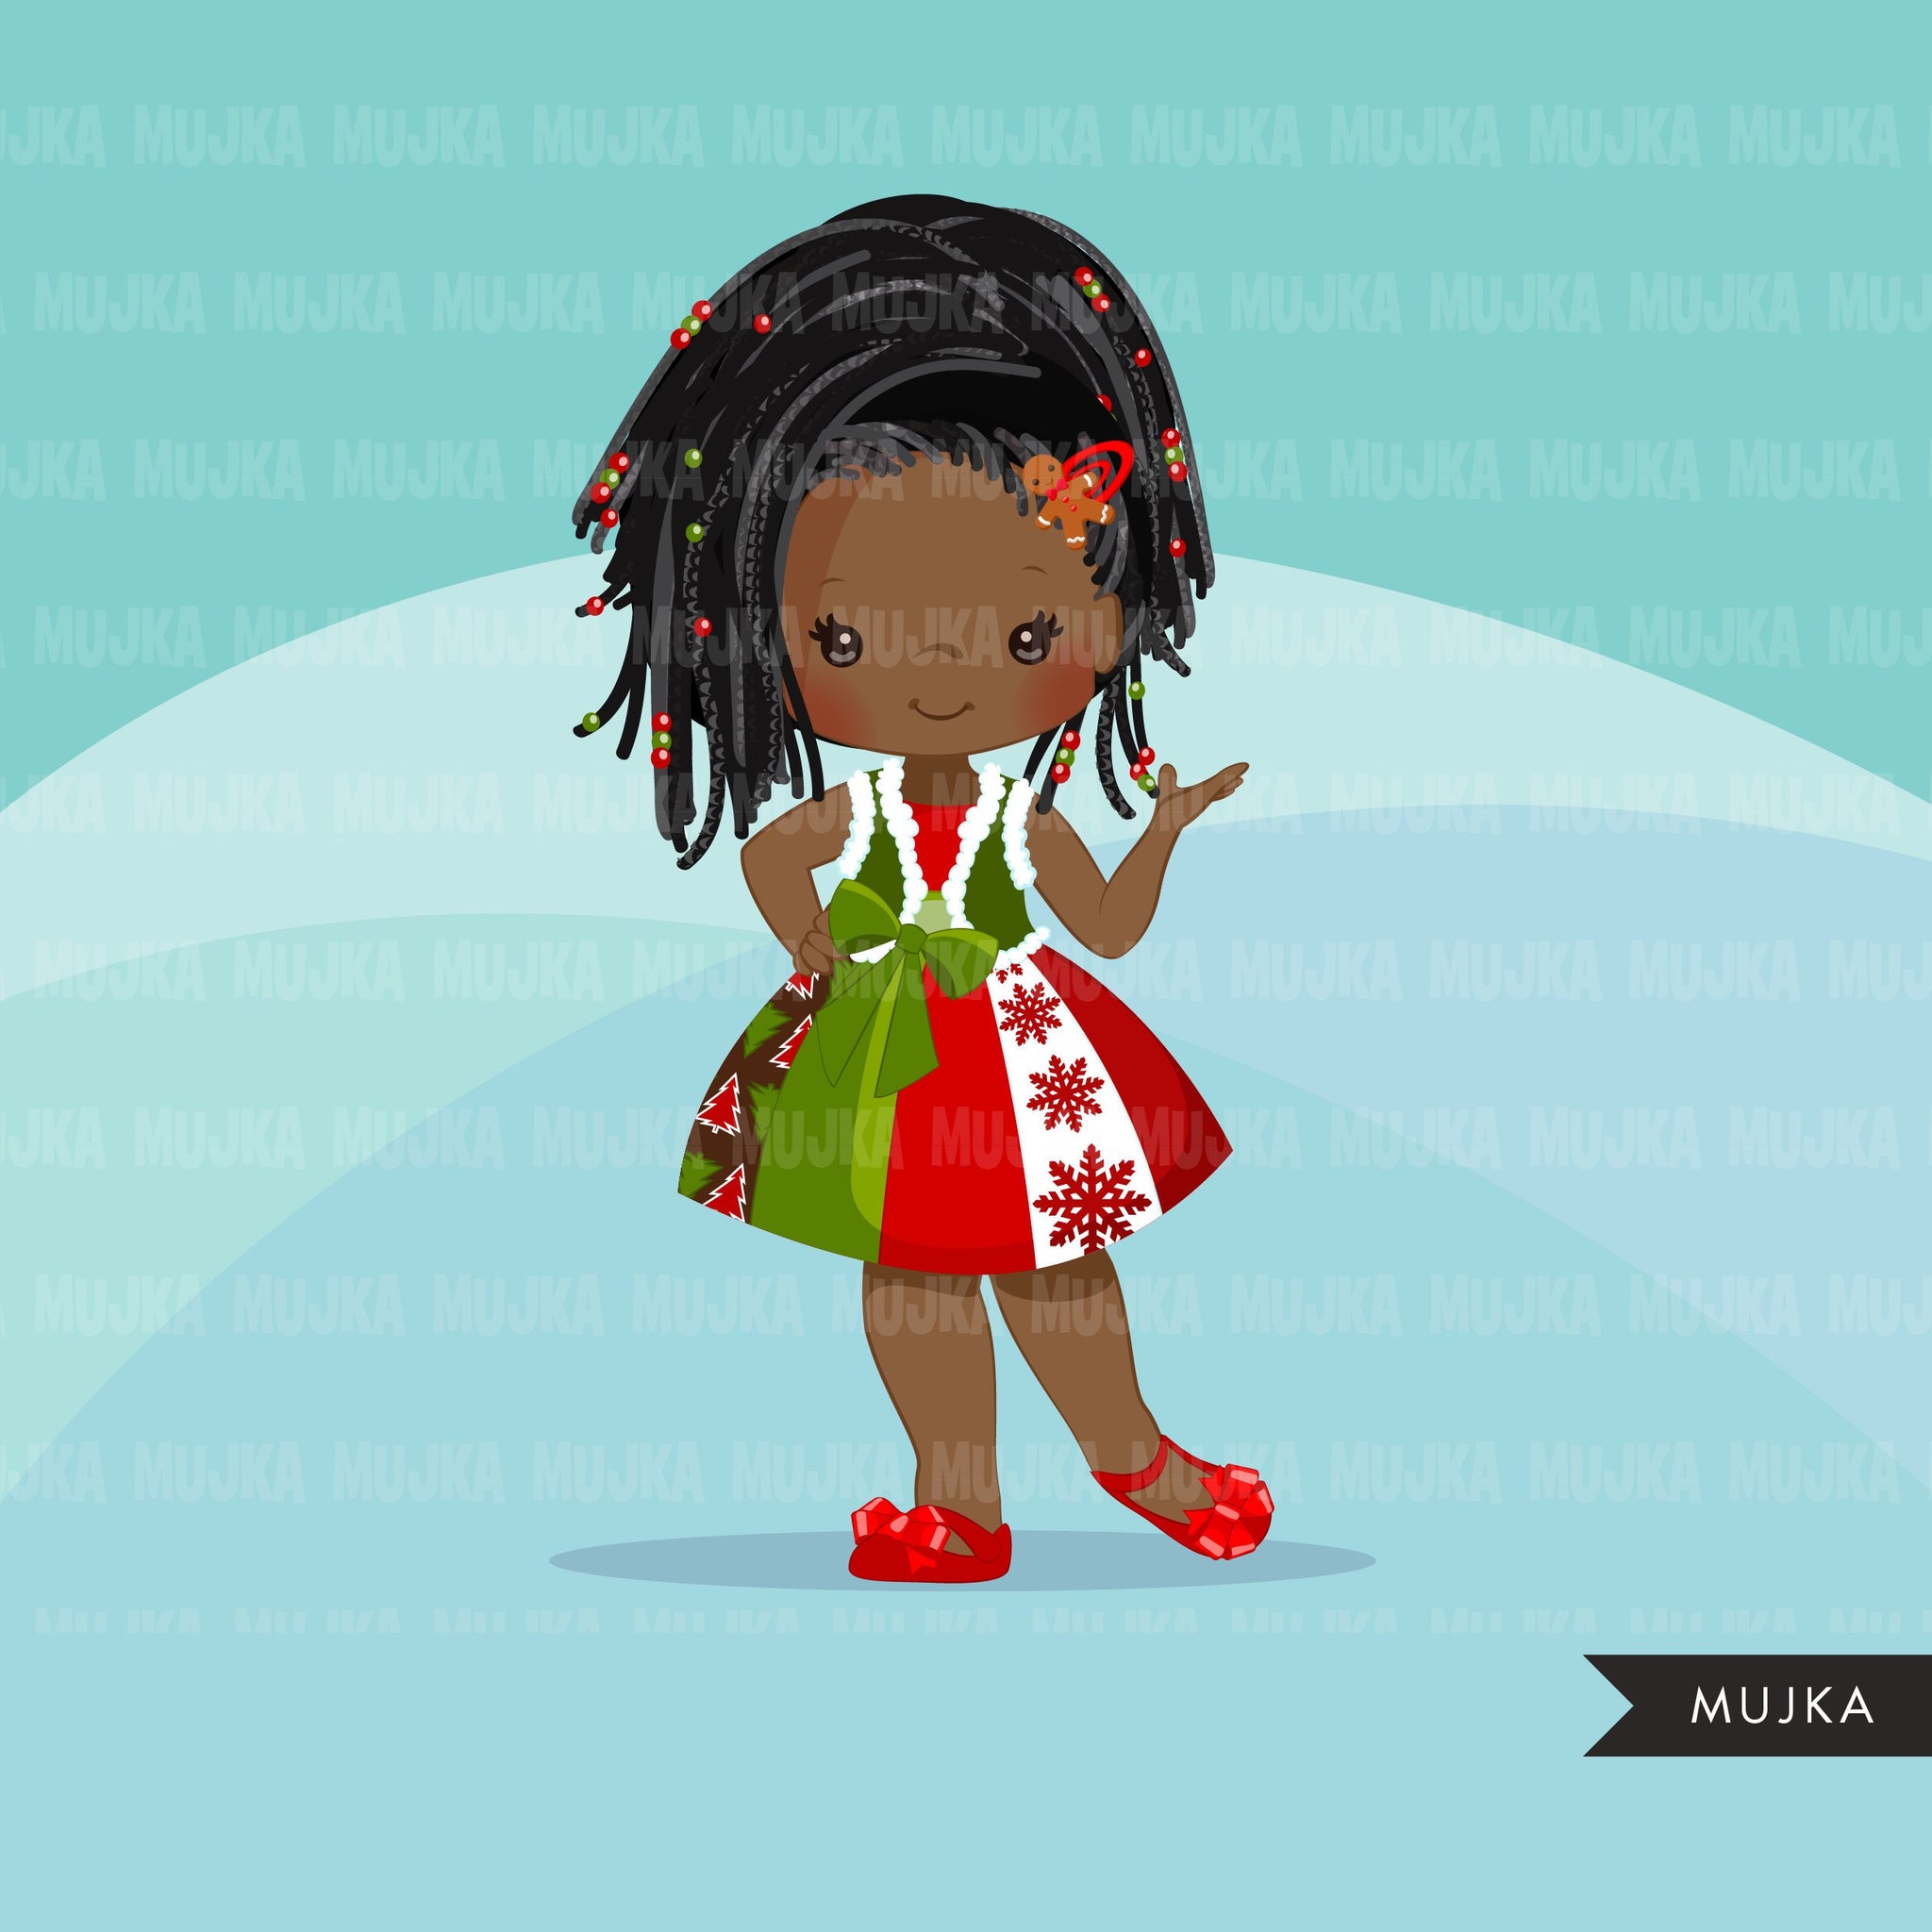 Christmas Clipart, black girl christmas outfit, Noel graphics, Holiday afro characters, png sublimation digital clip art